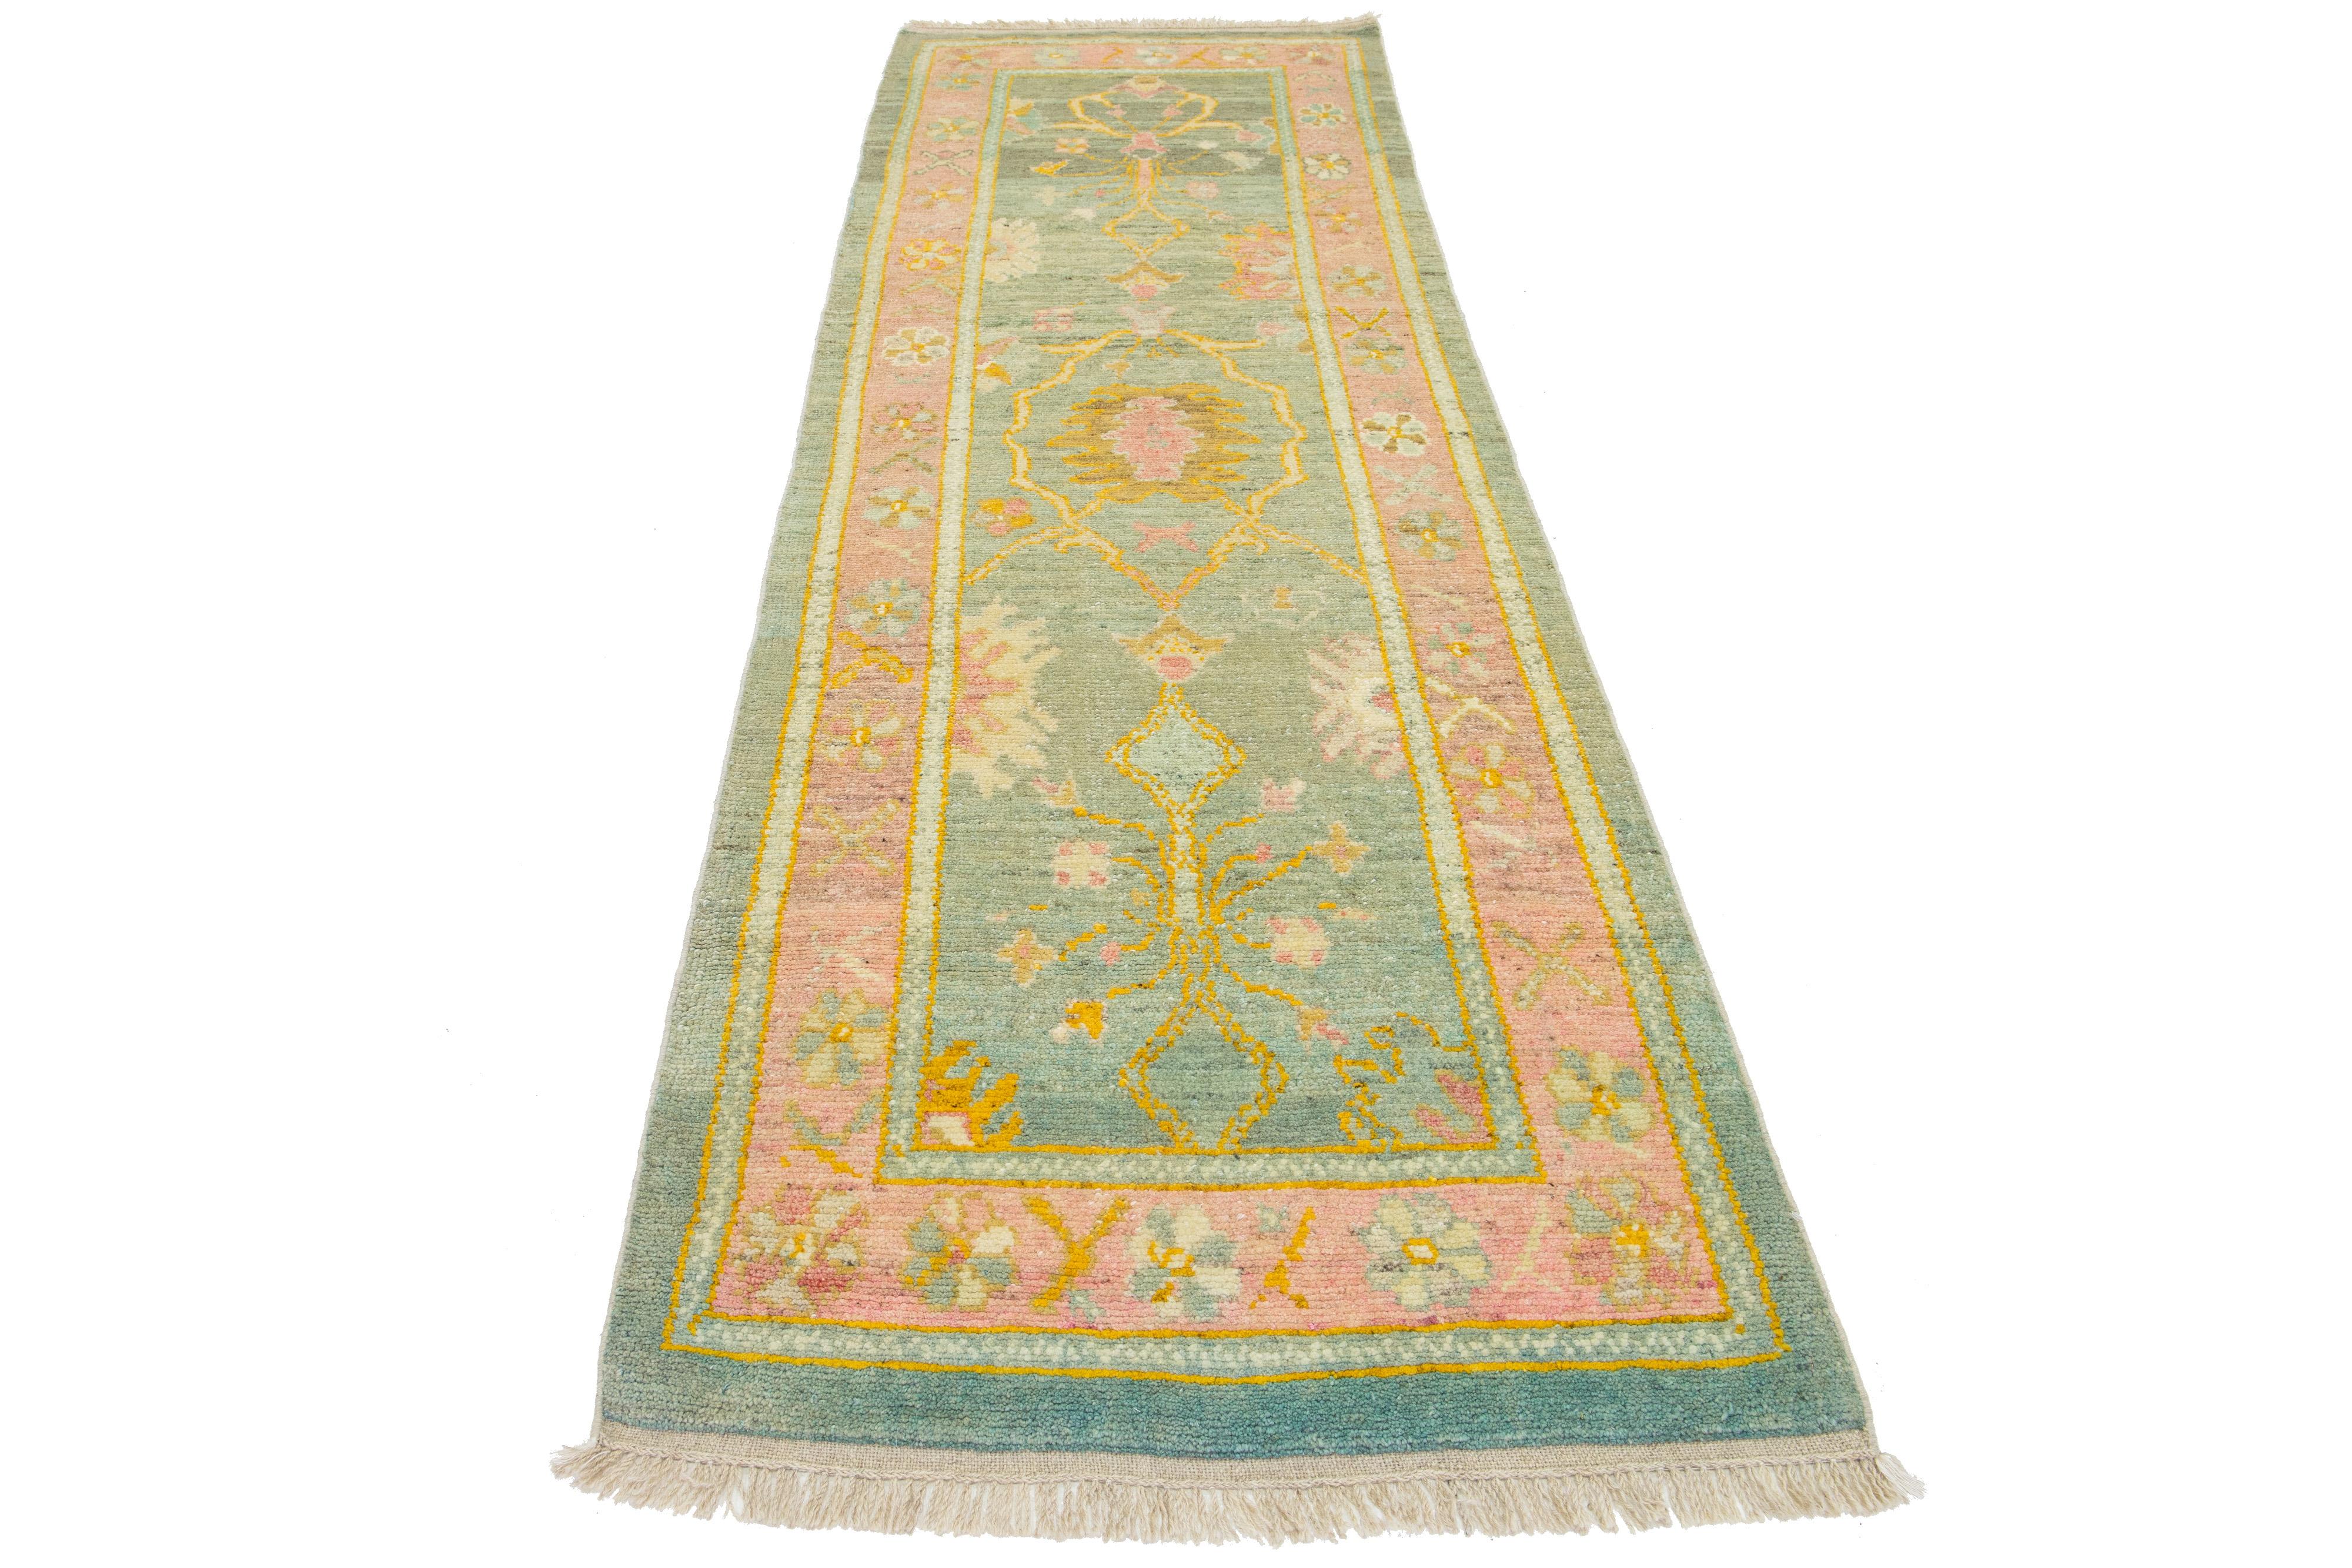 Beautiful modern Oushak hand-knotted wool rug with a green color field. This Turkish Piece has a pink frame with yellow, orange, pink, and green accent colors in a gorgeous all-over floral design.

This rug measures 2'11